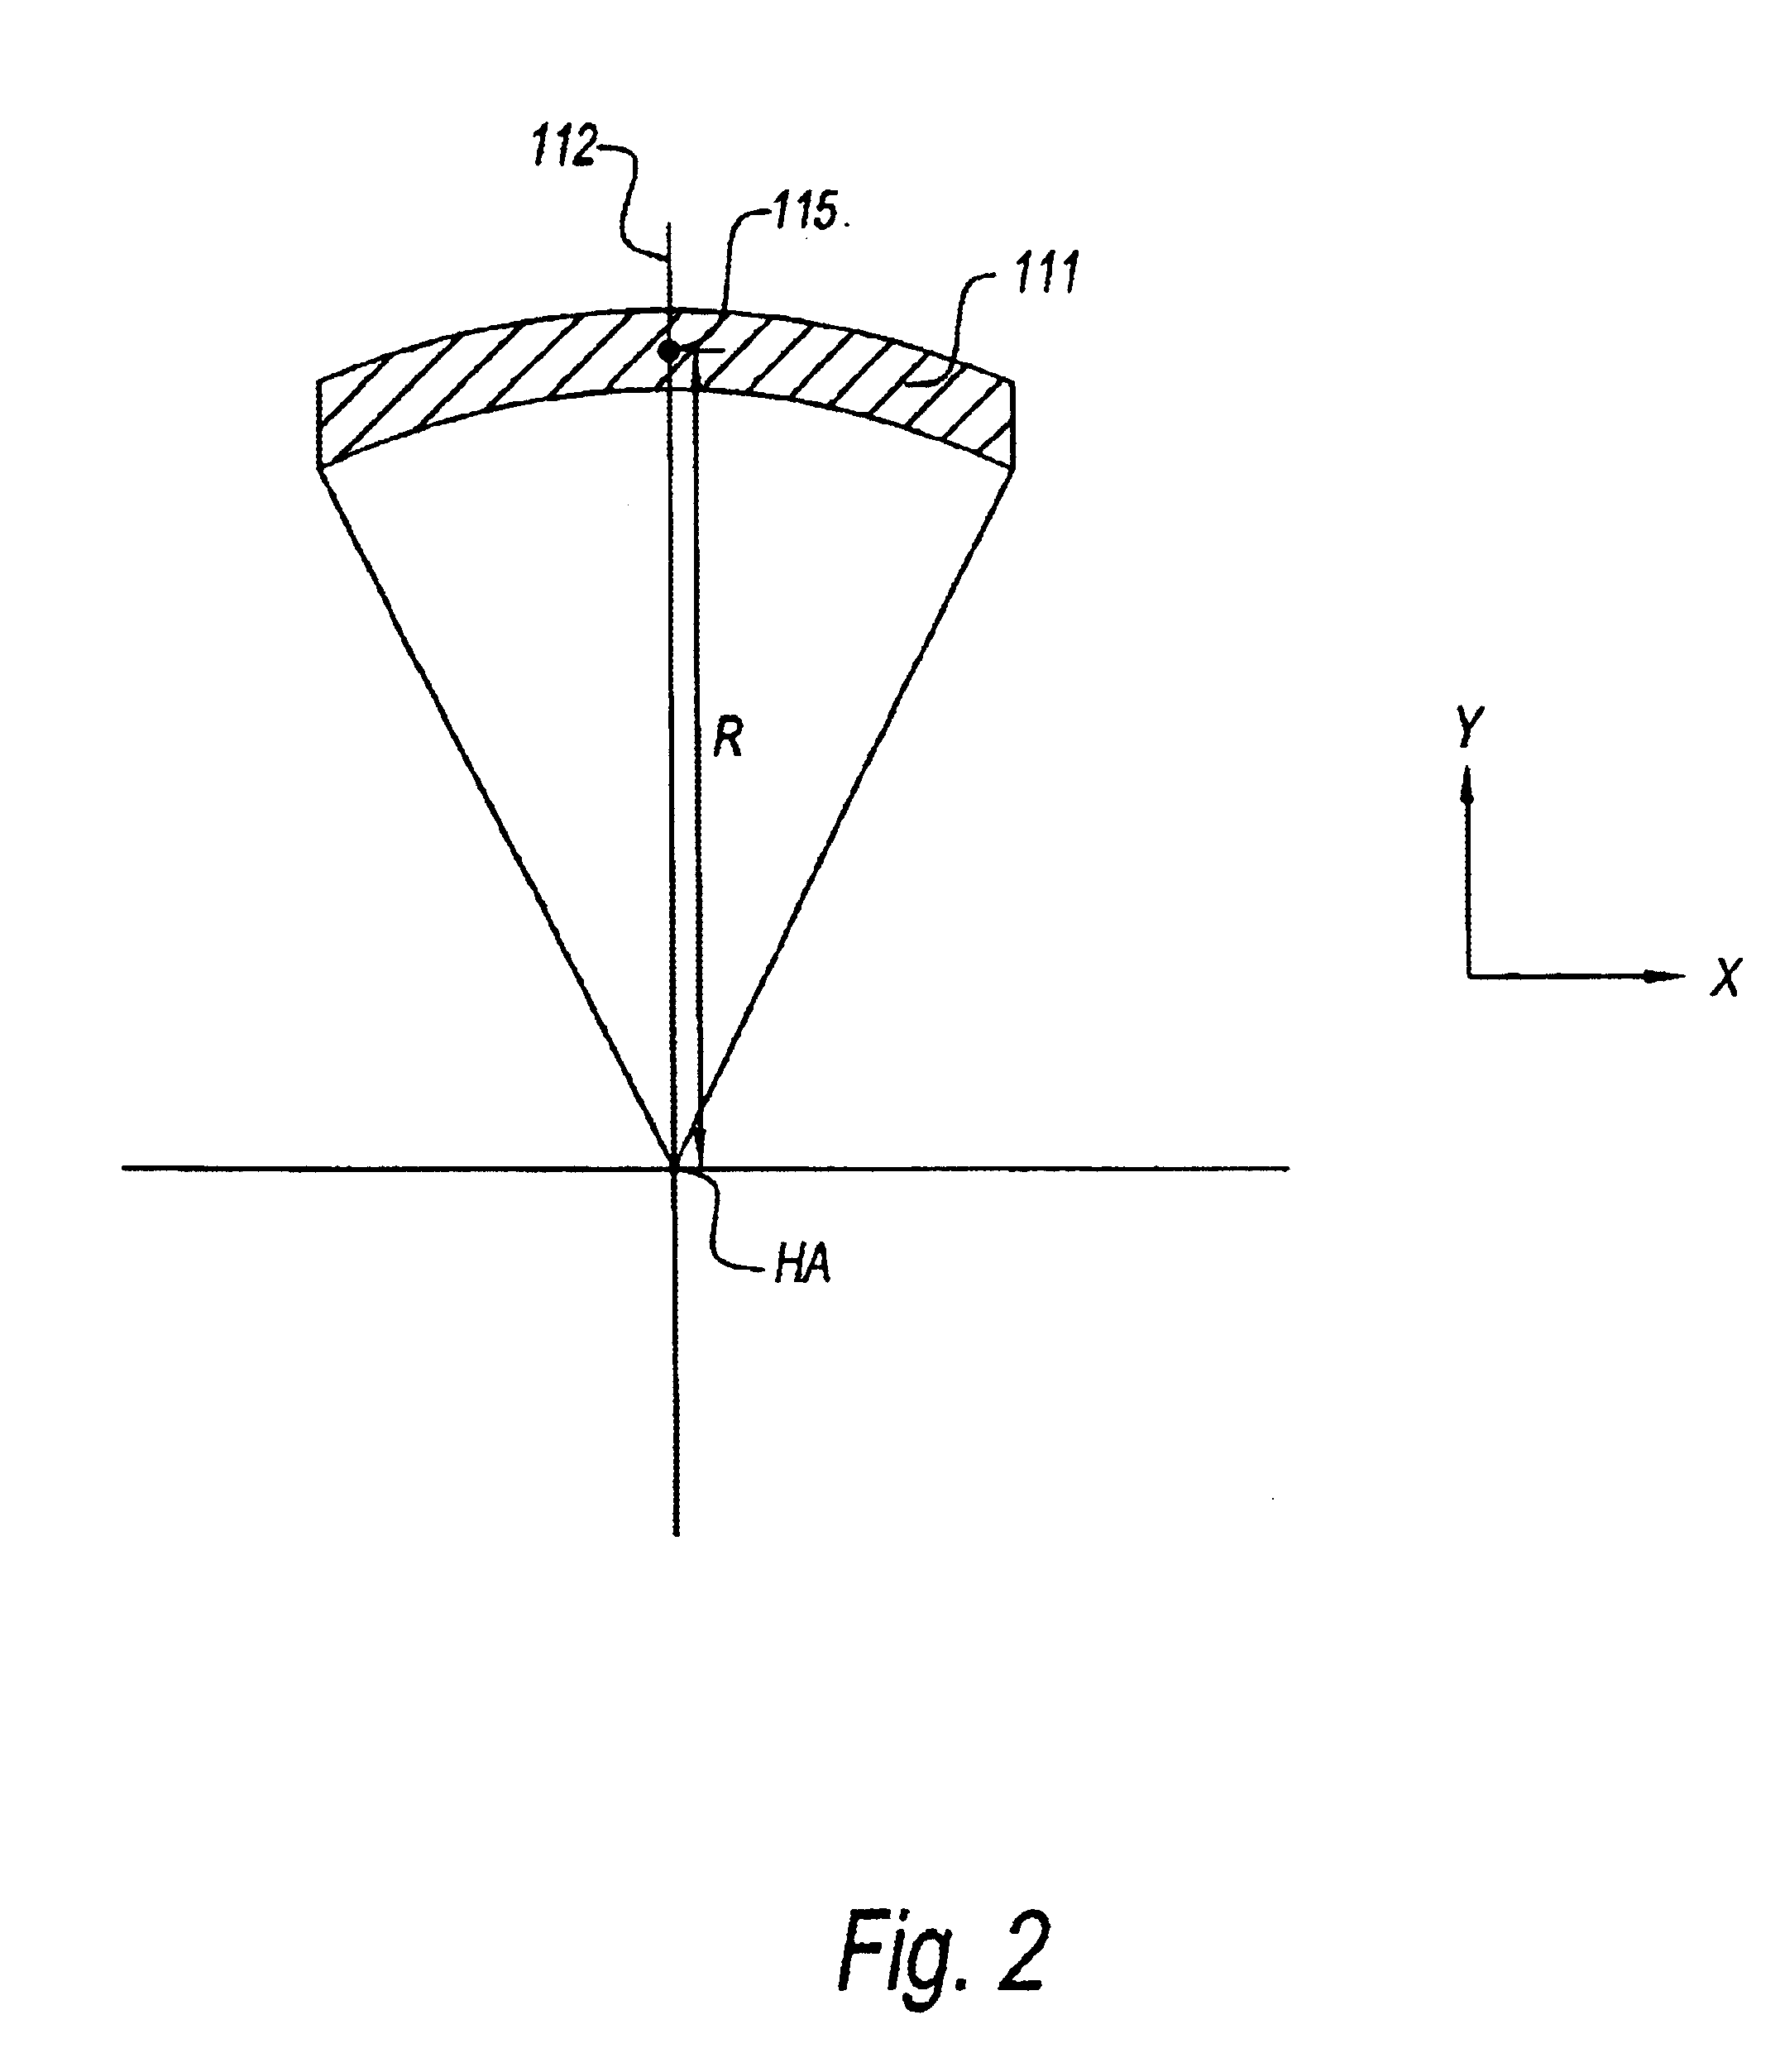 6-mirror projection objective with few lenses